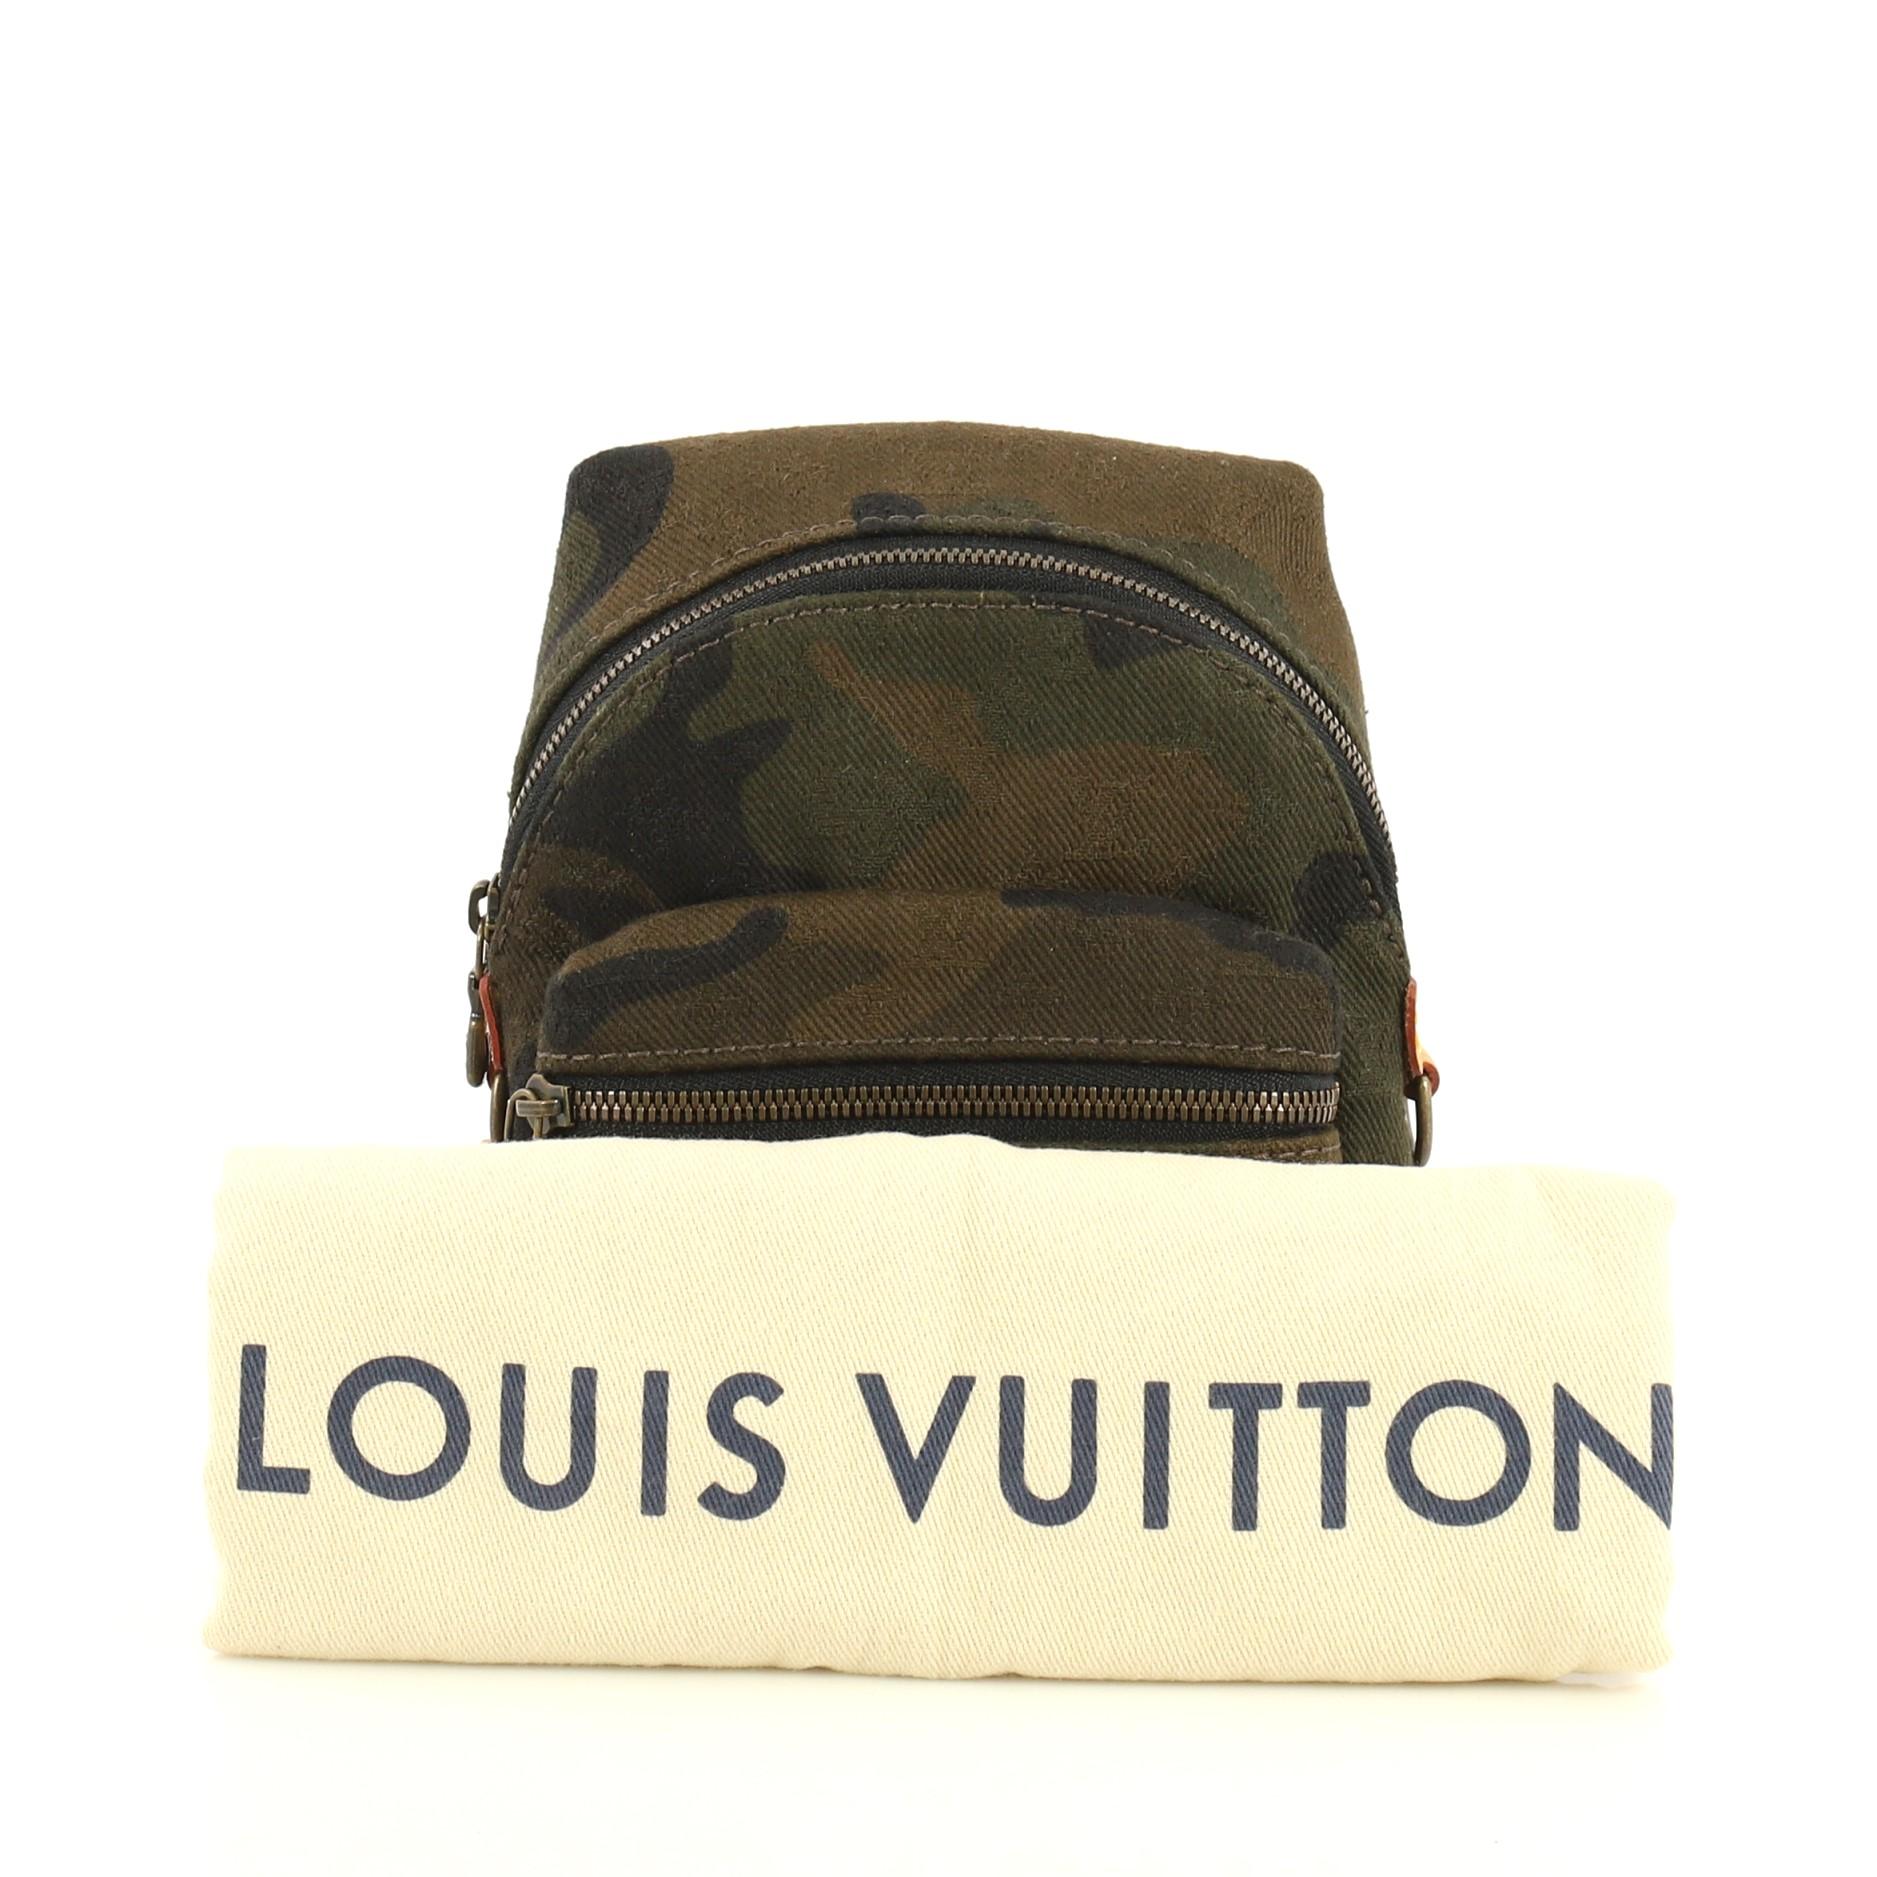 This Louis Vuitton Apollo Backpack Limited Edition Supreme Camouflage Canvas Nano, crafted in camouflage 